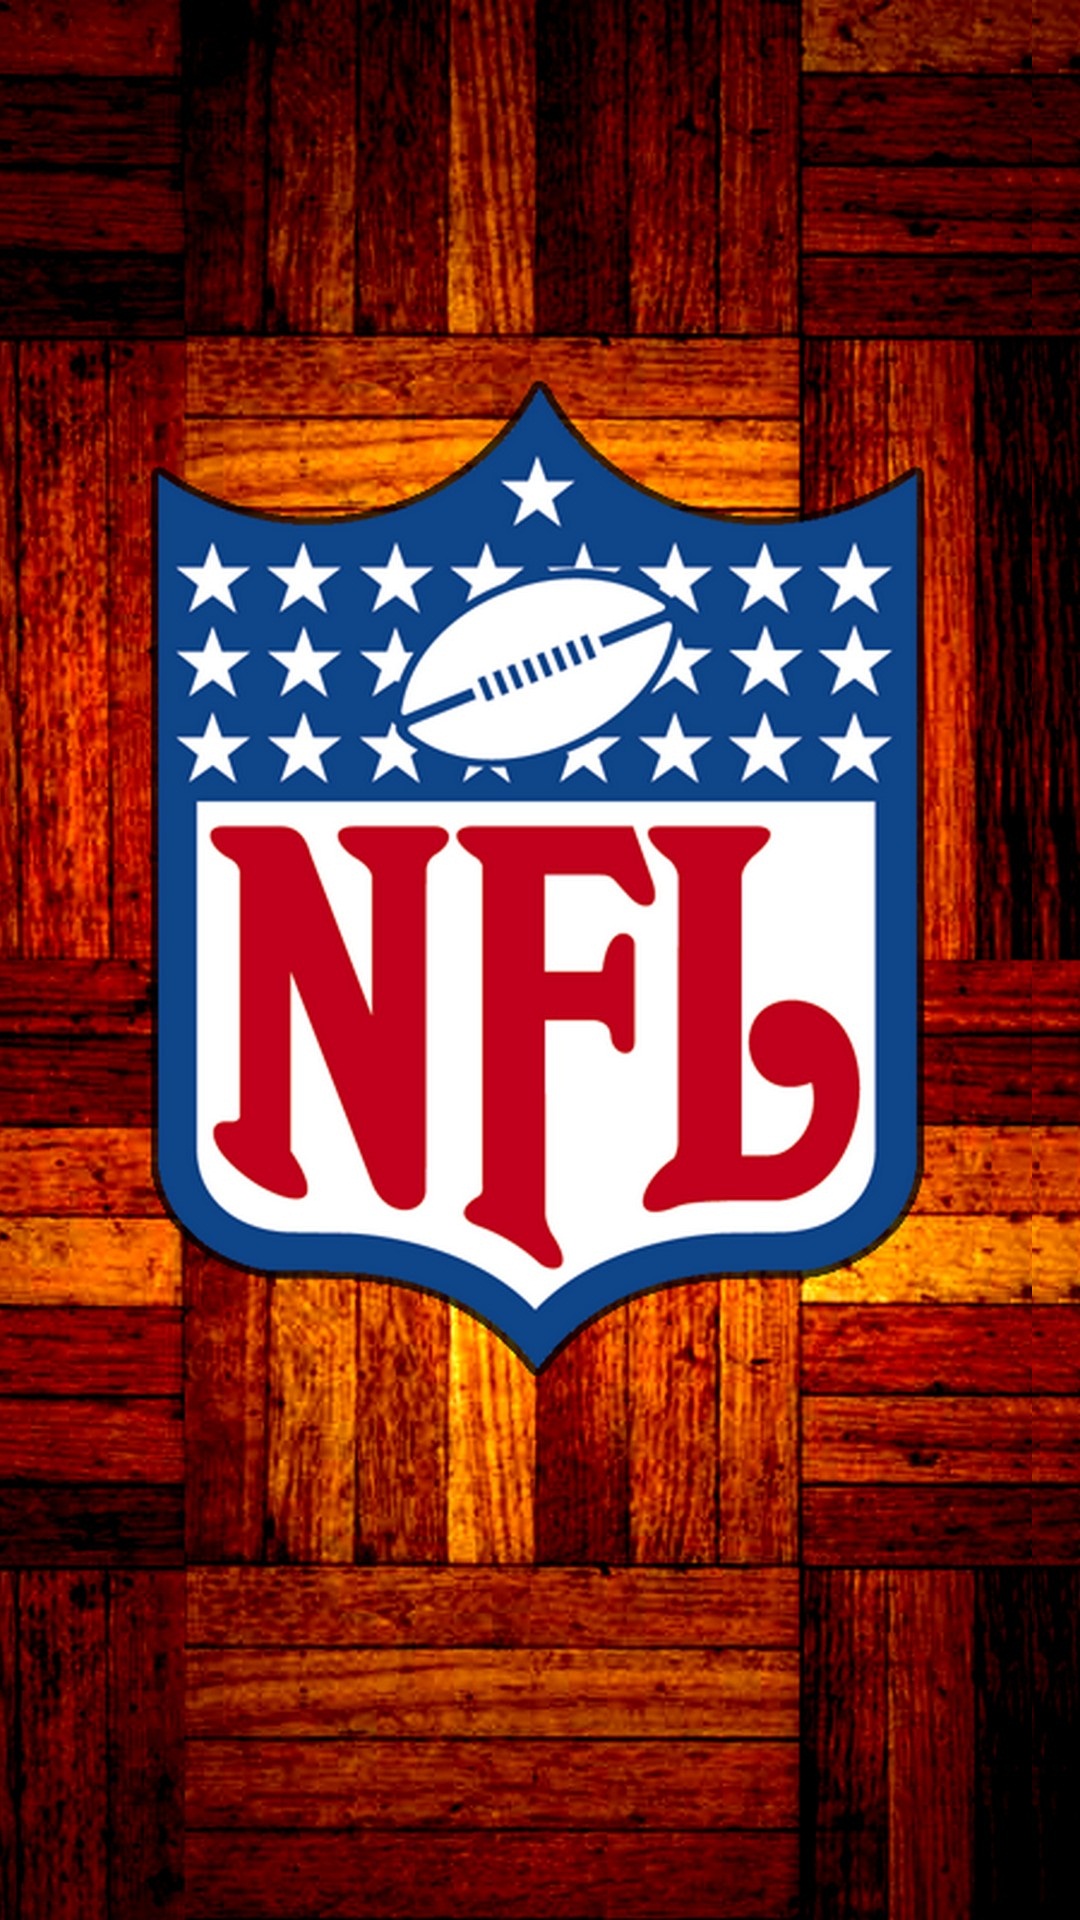 NFL HD Wallpaper For iPhone 1080x1920